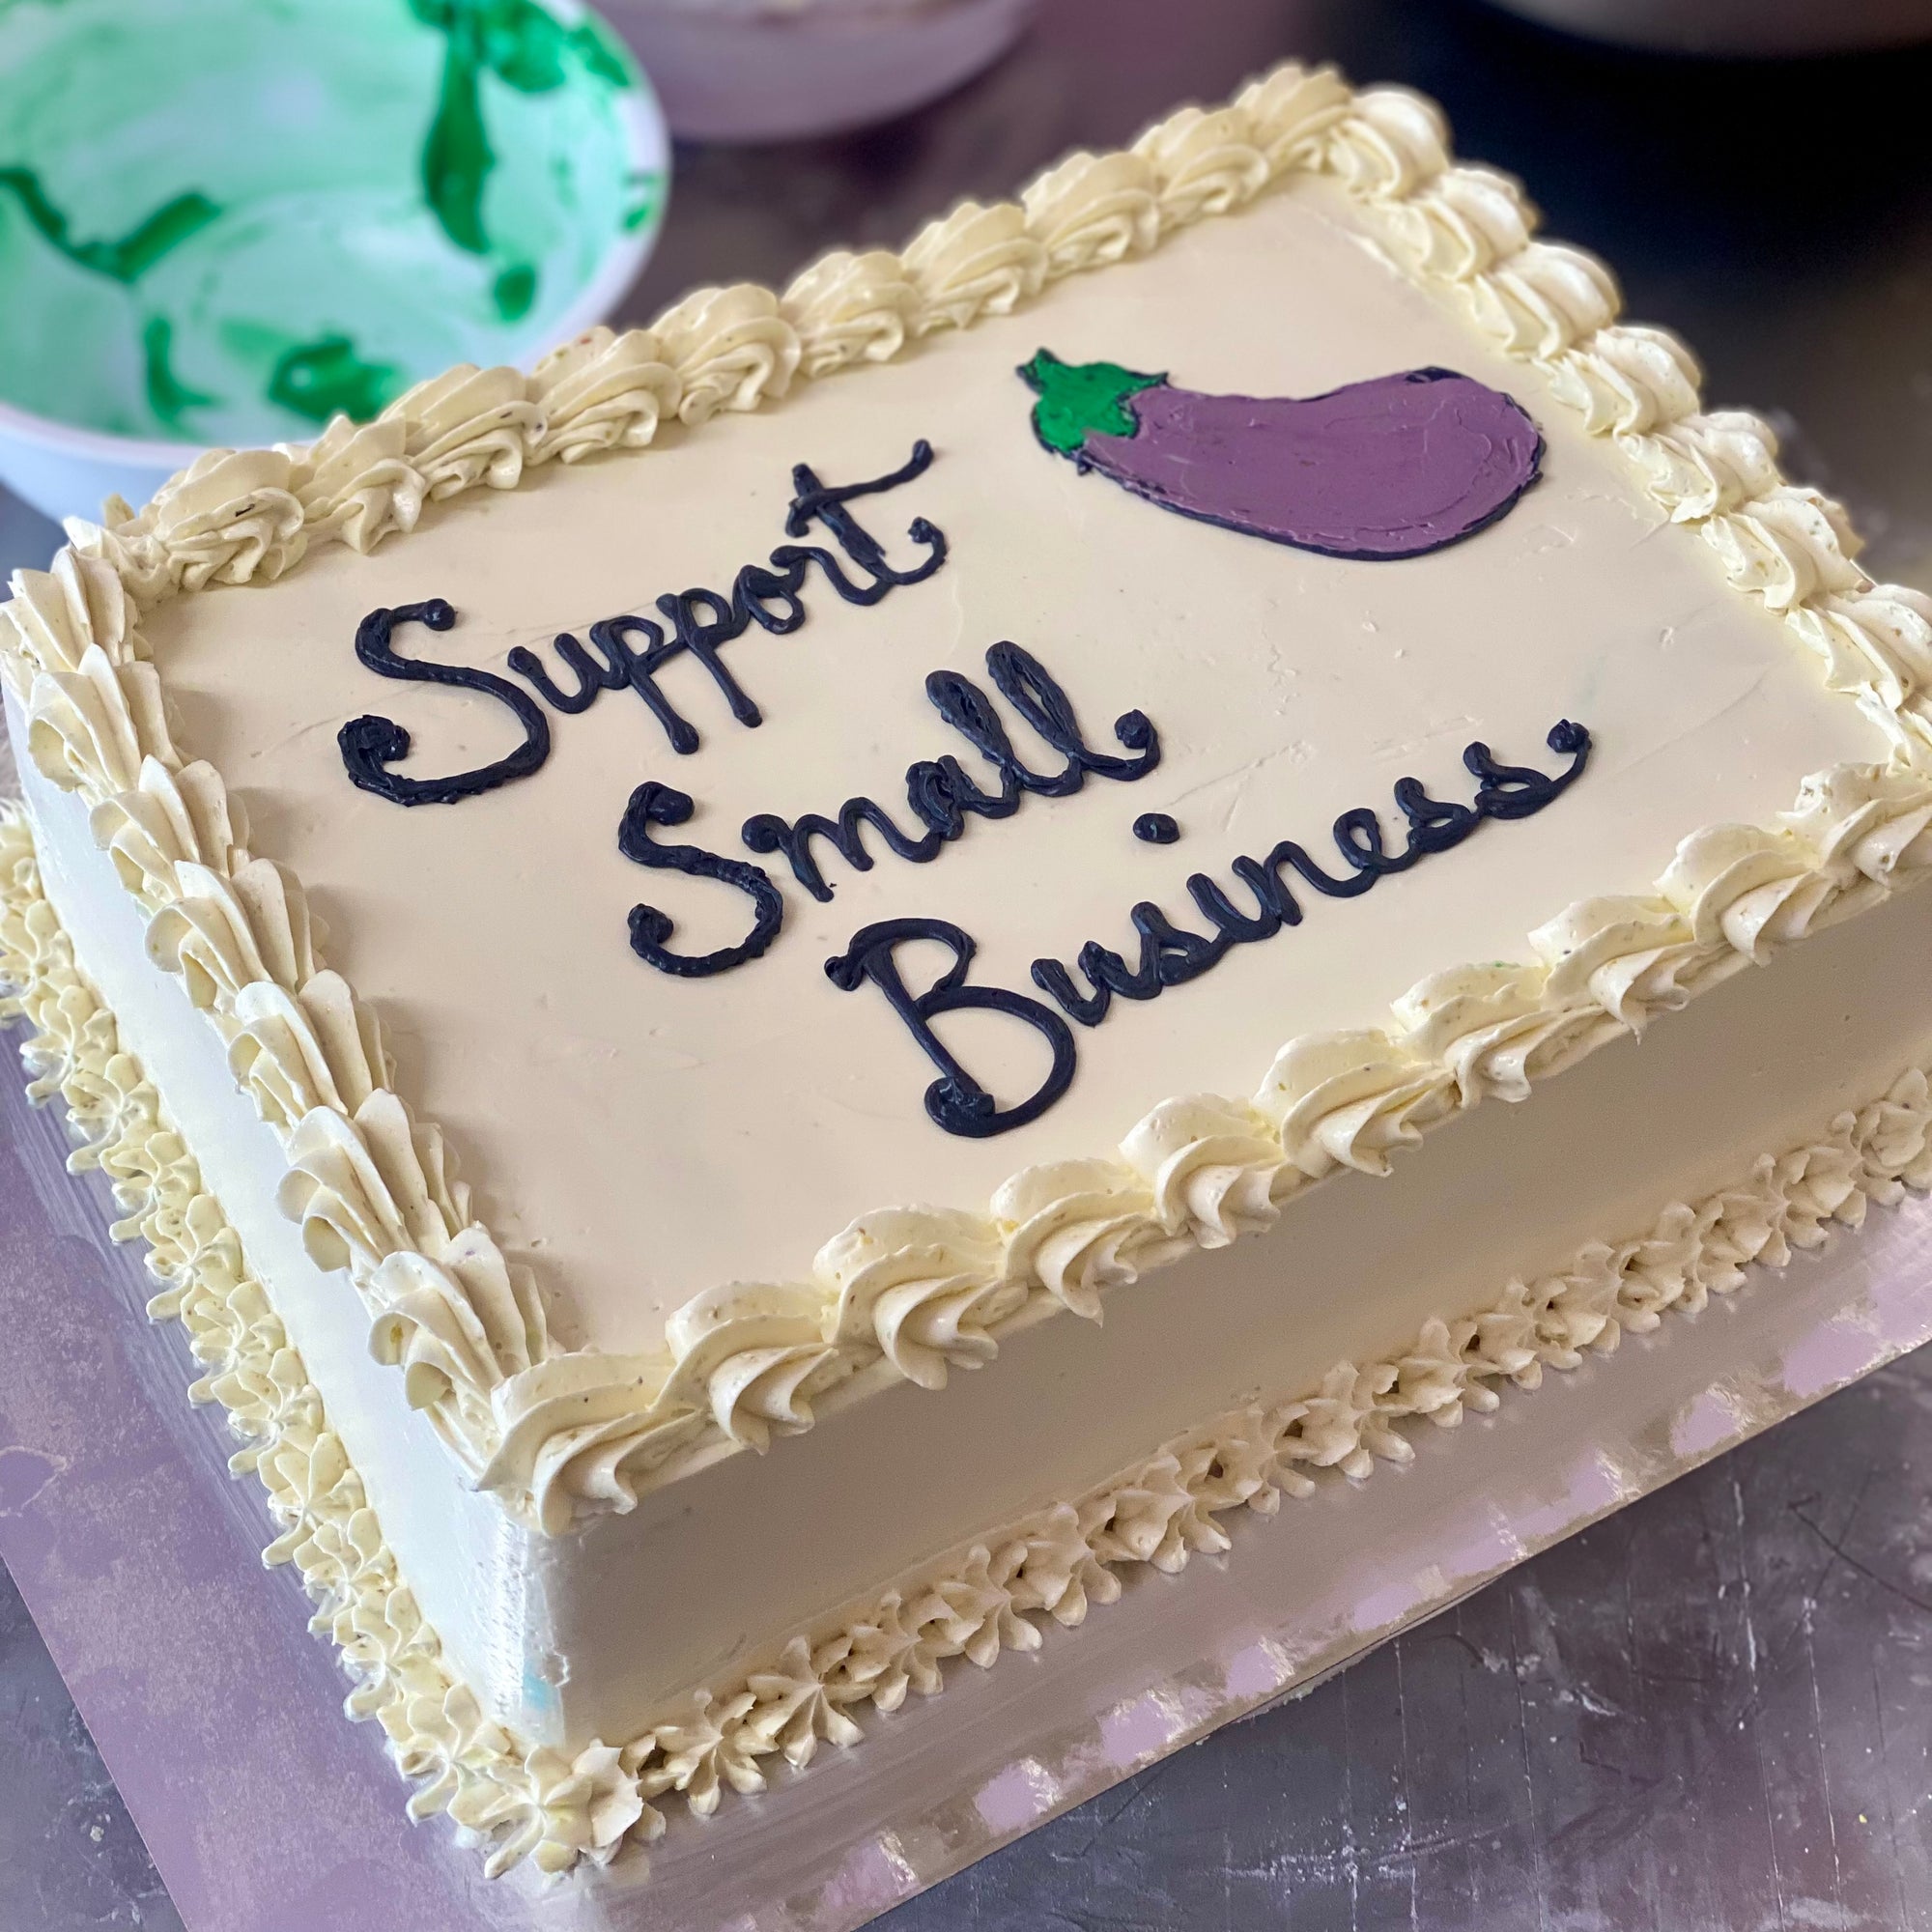 Support Small Business Cake